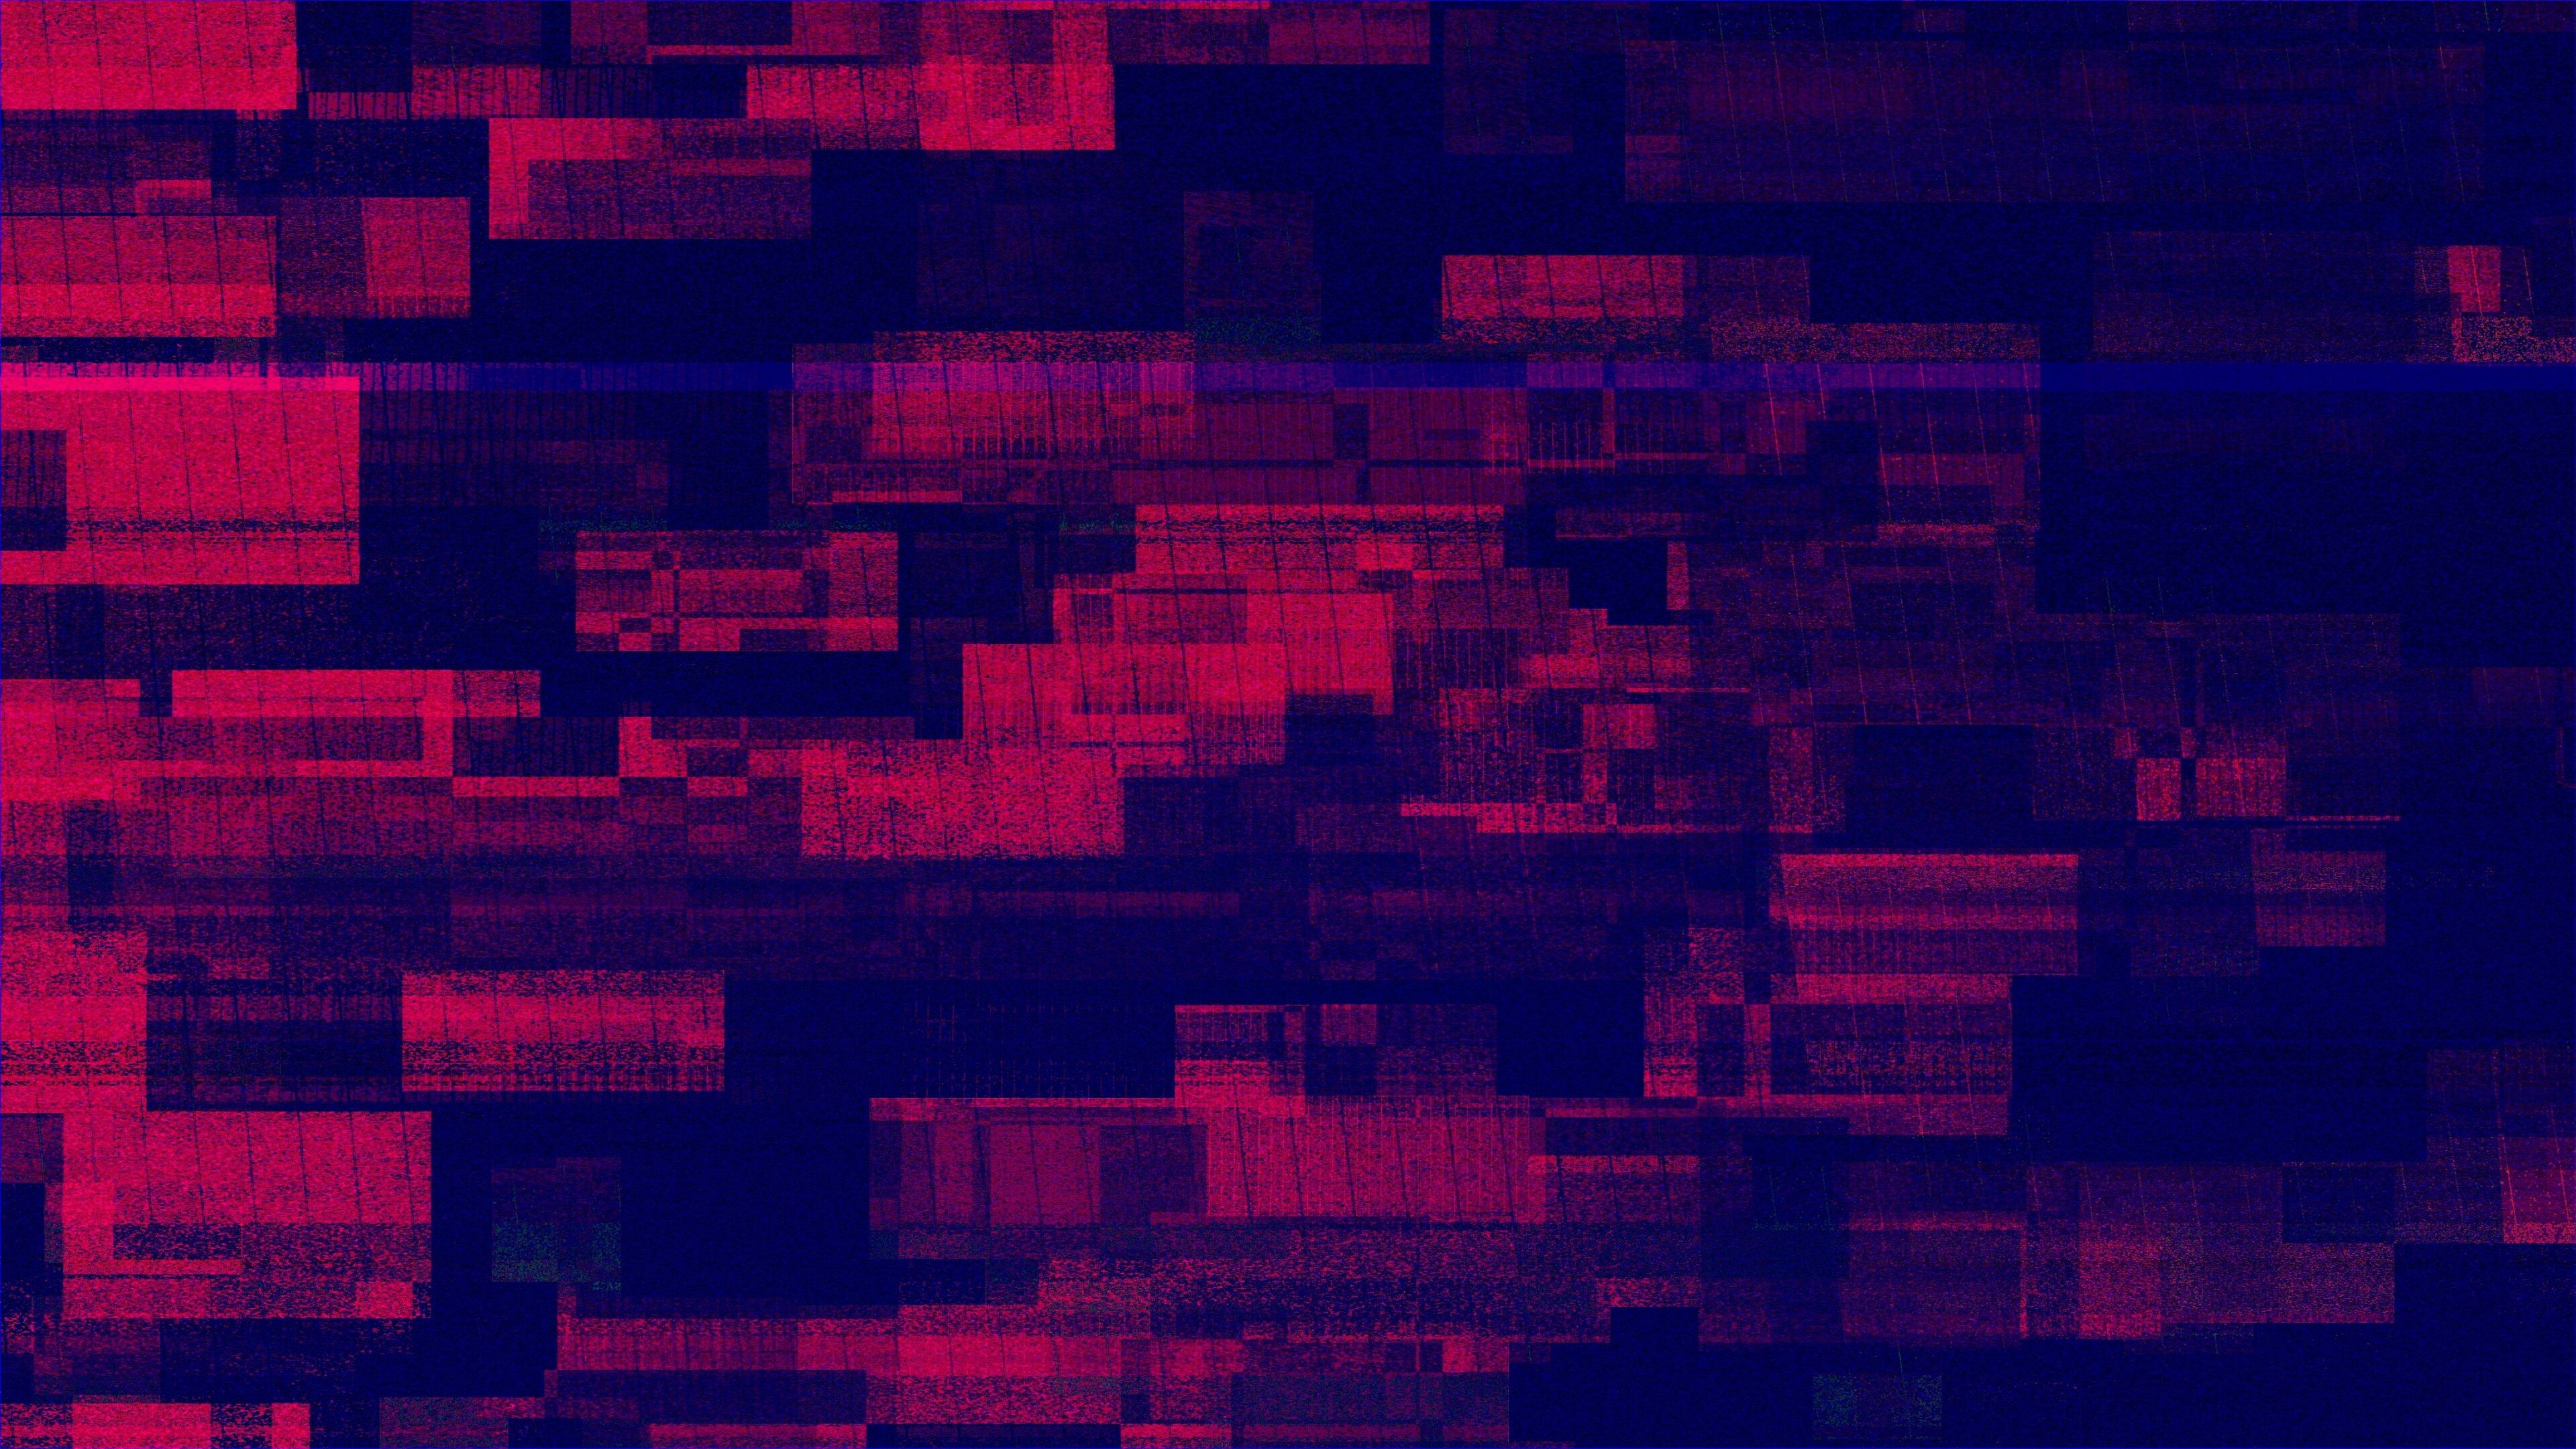 Glitch: Gaming, Parallel line segments, Obtuse angles, Cyberspace malfunction. 3840x2160 4K Wallpaper.